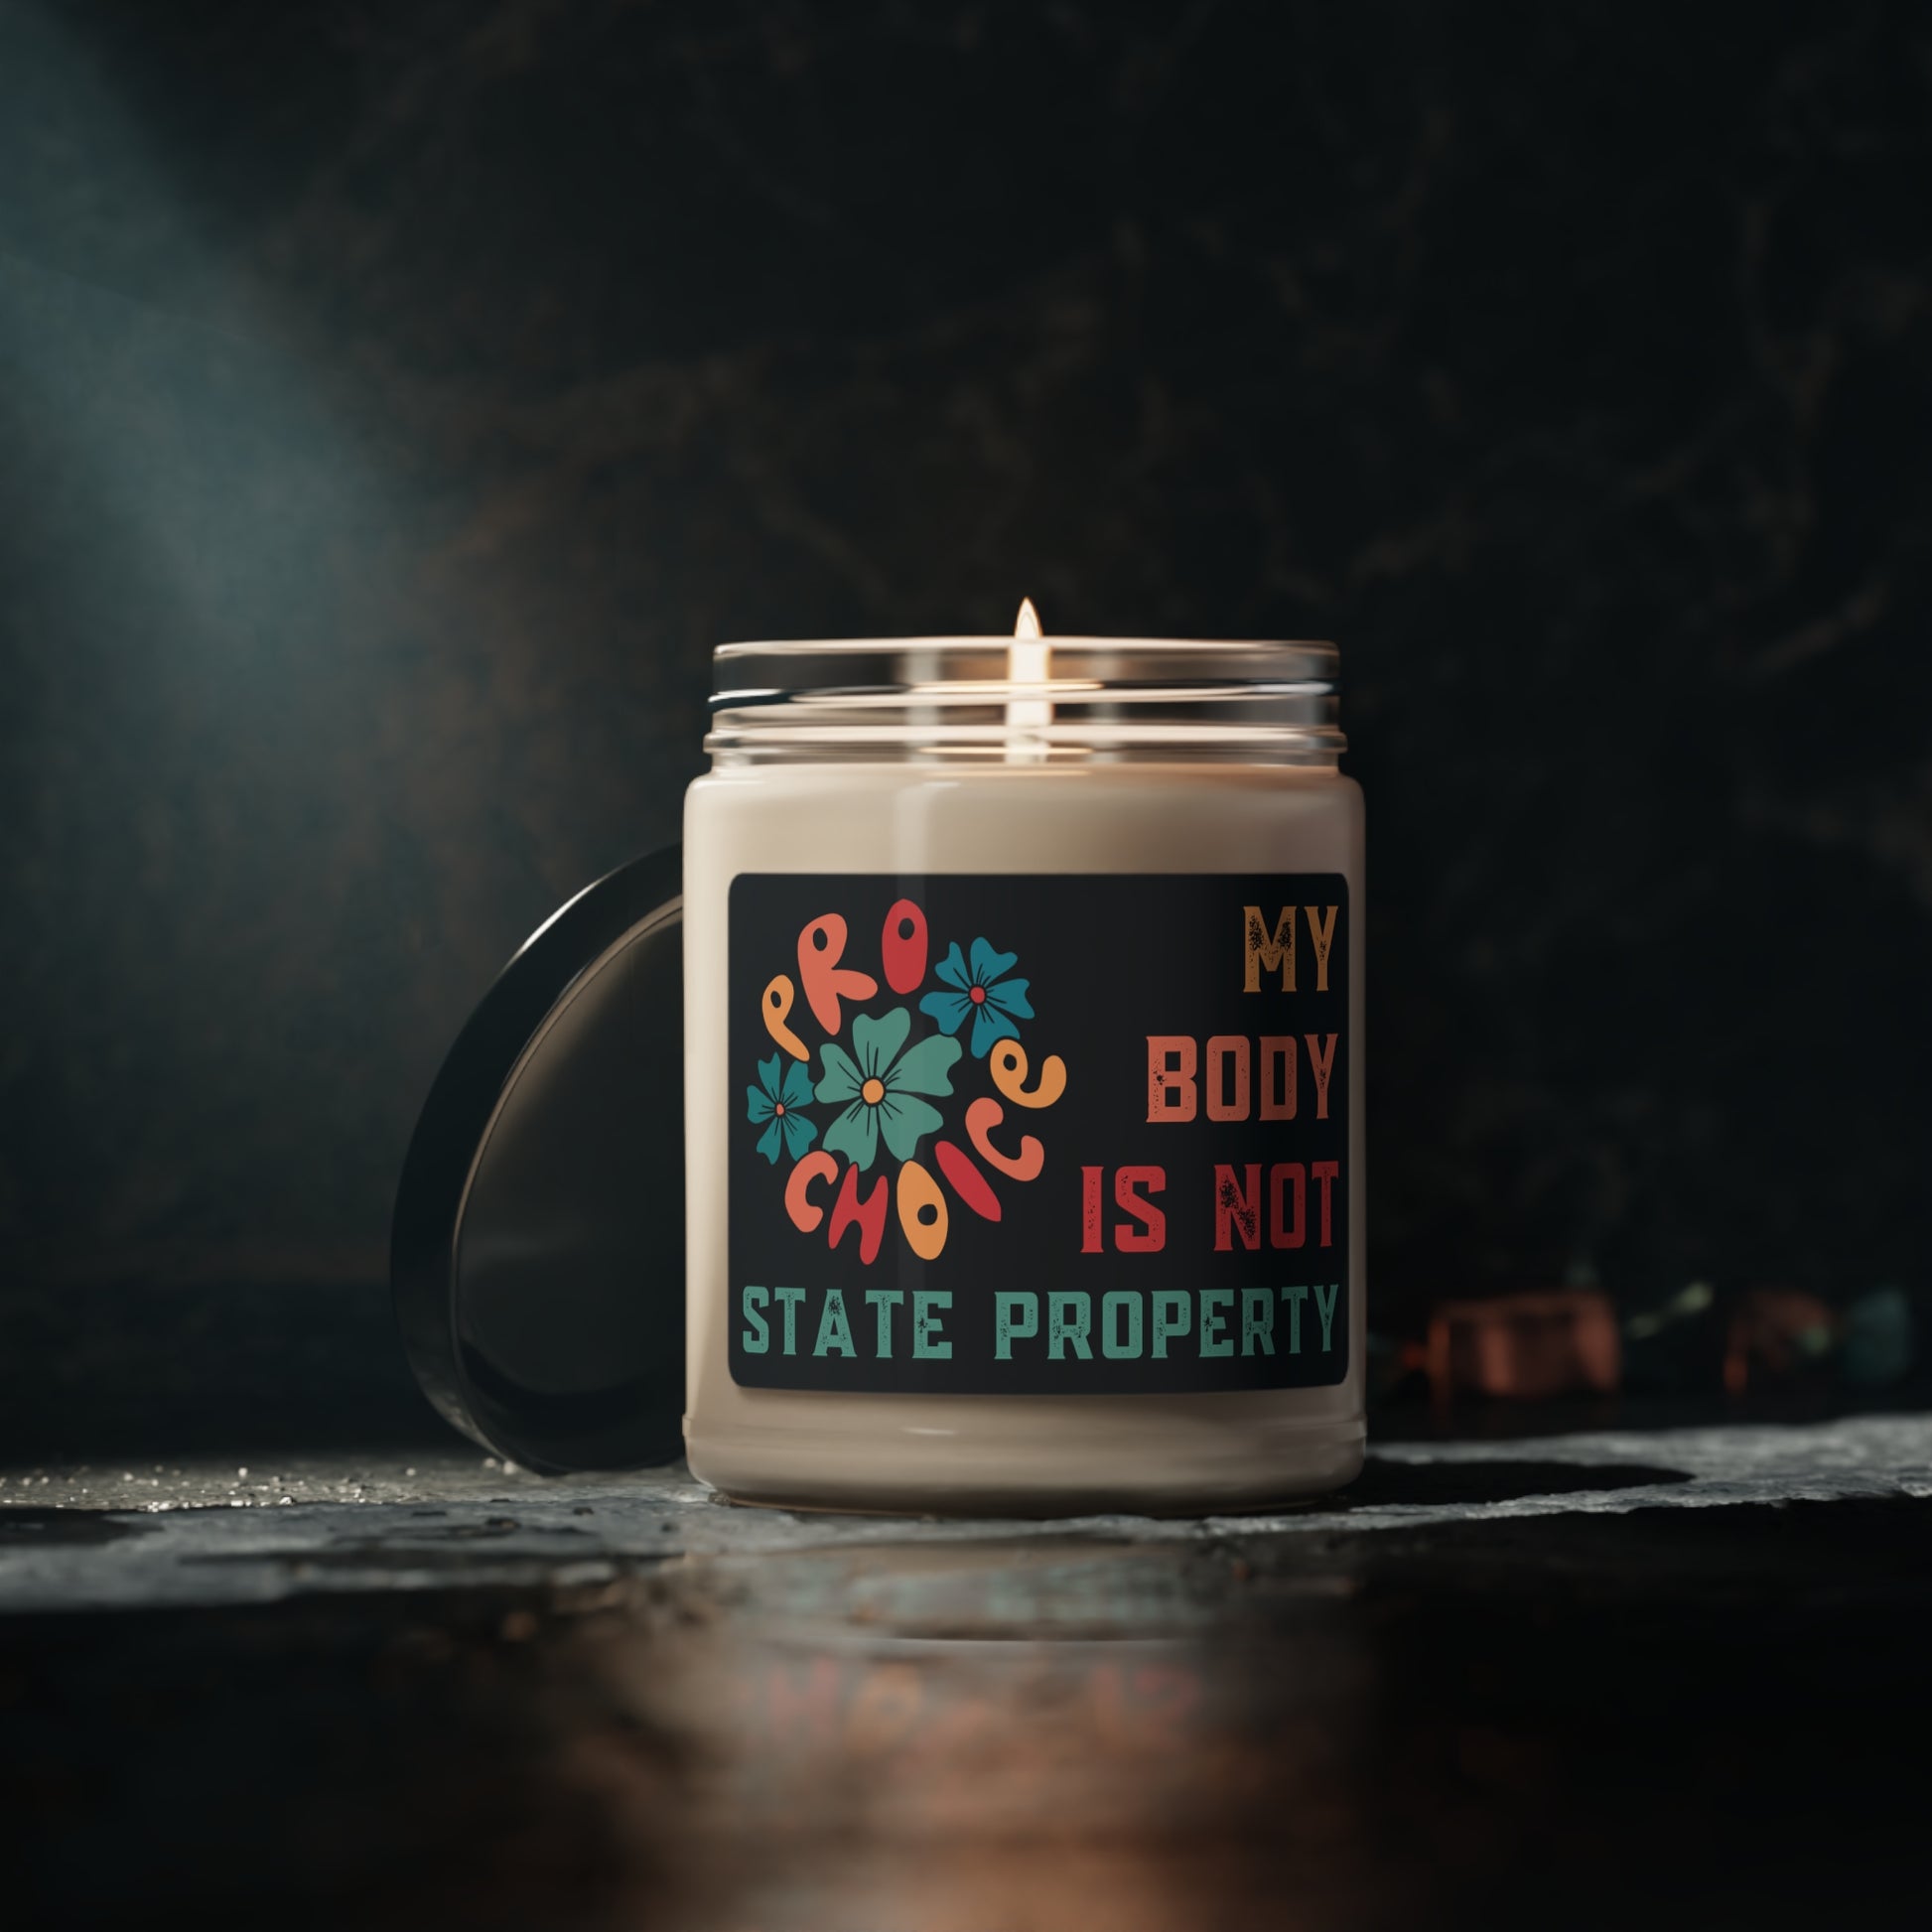 Whether you're stuffing packages for the next political event or women's rights meeting or looking for a gift item for an abortion-rights ally, this candle is an excellent 'choice.'